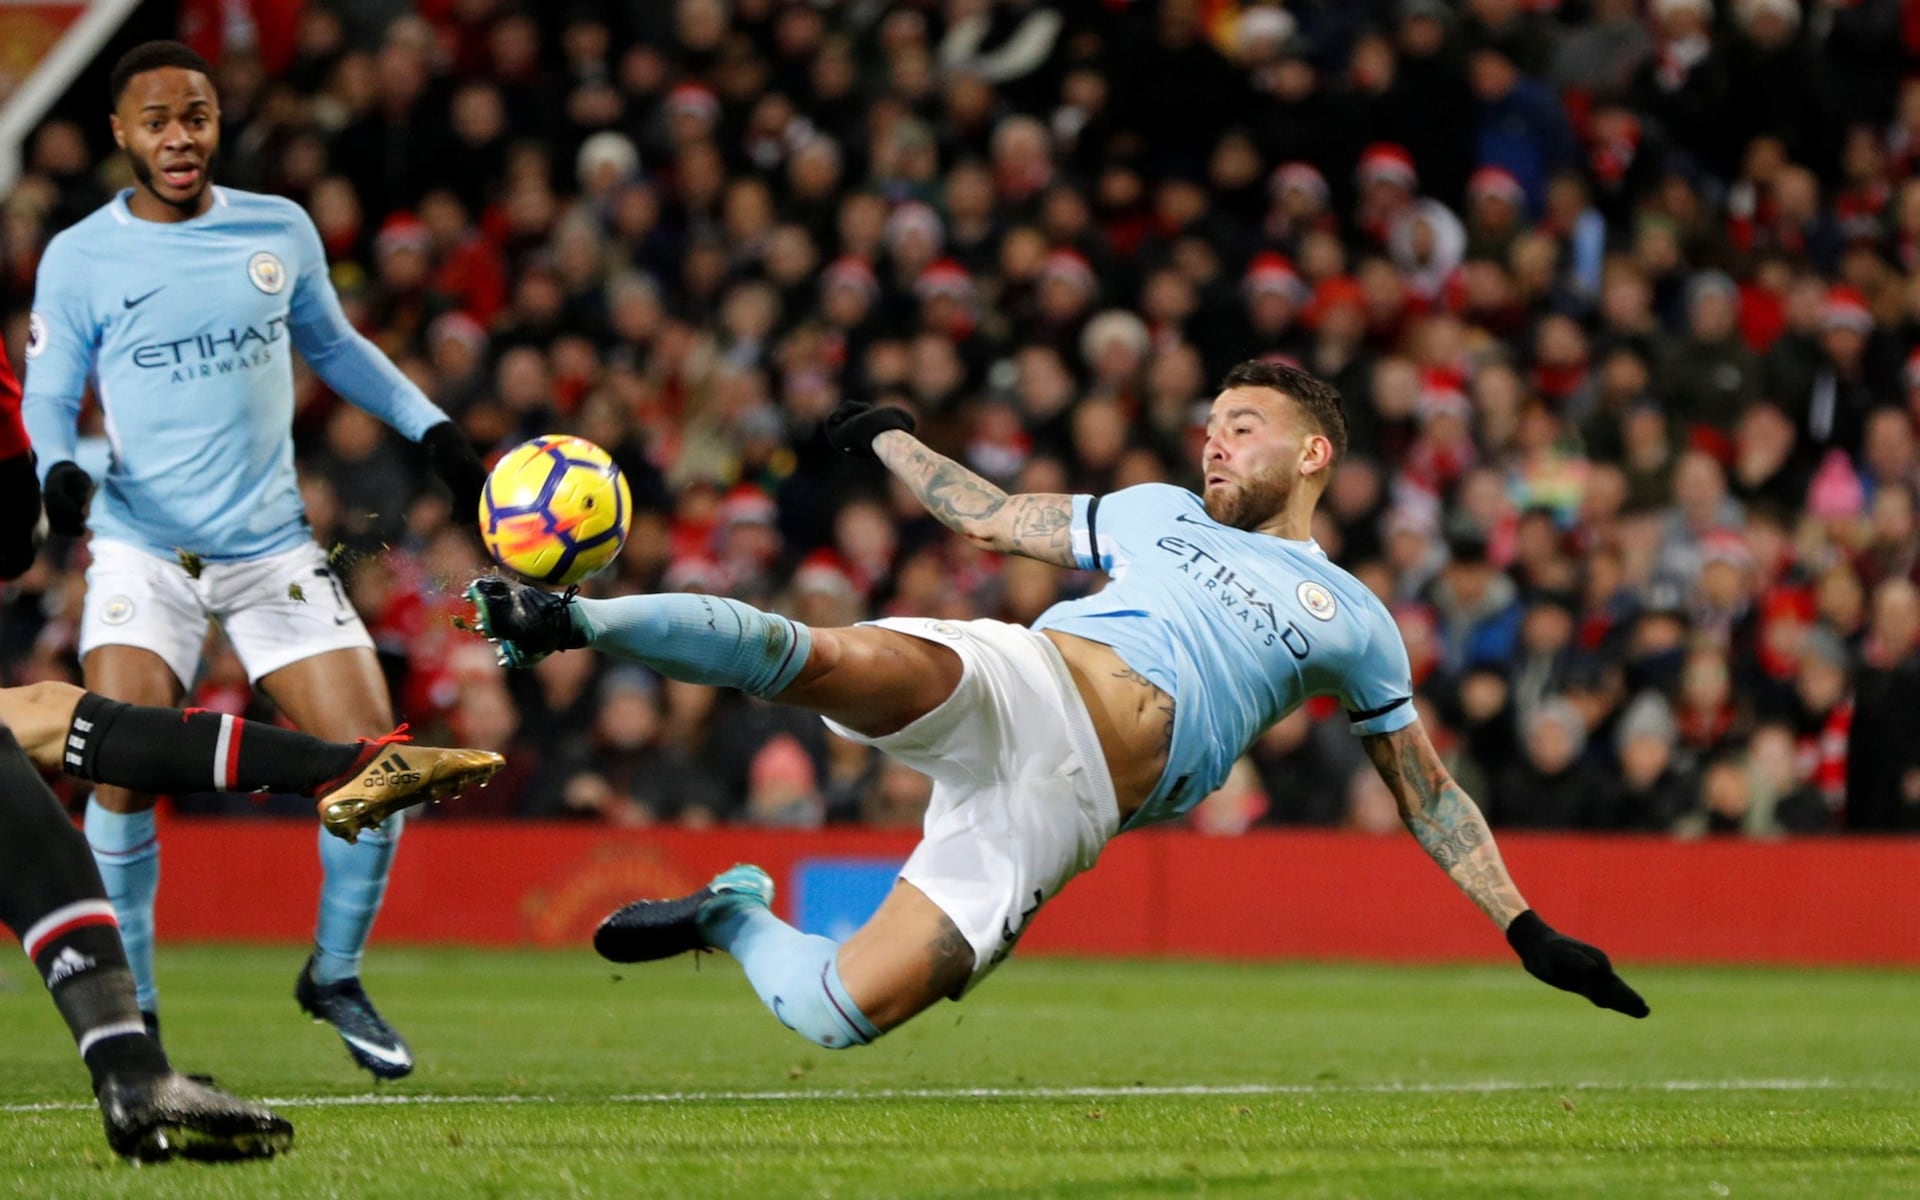 Man Utd beaten 2-1 by Man City 2, outclassed by slick David Silva as City surge 11 points clear in title race